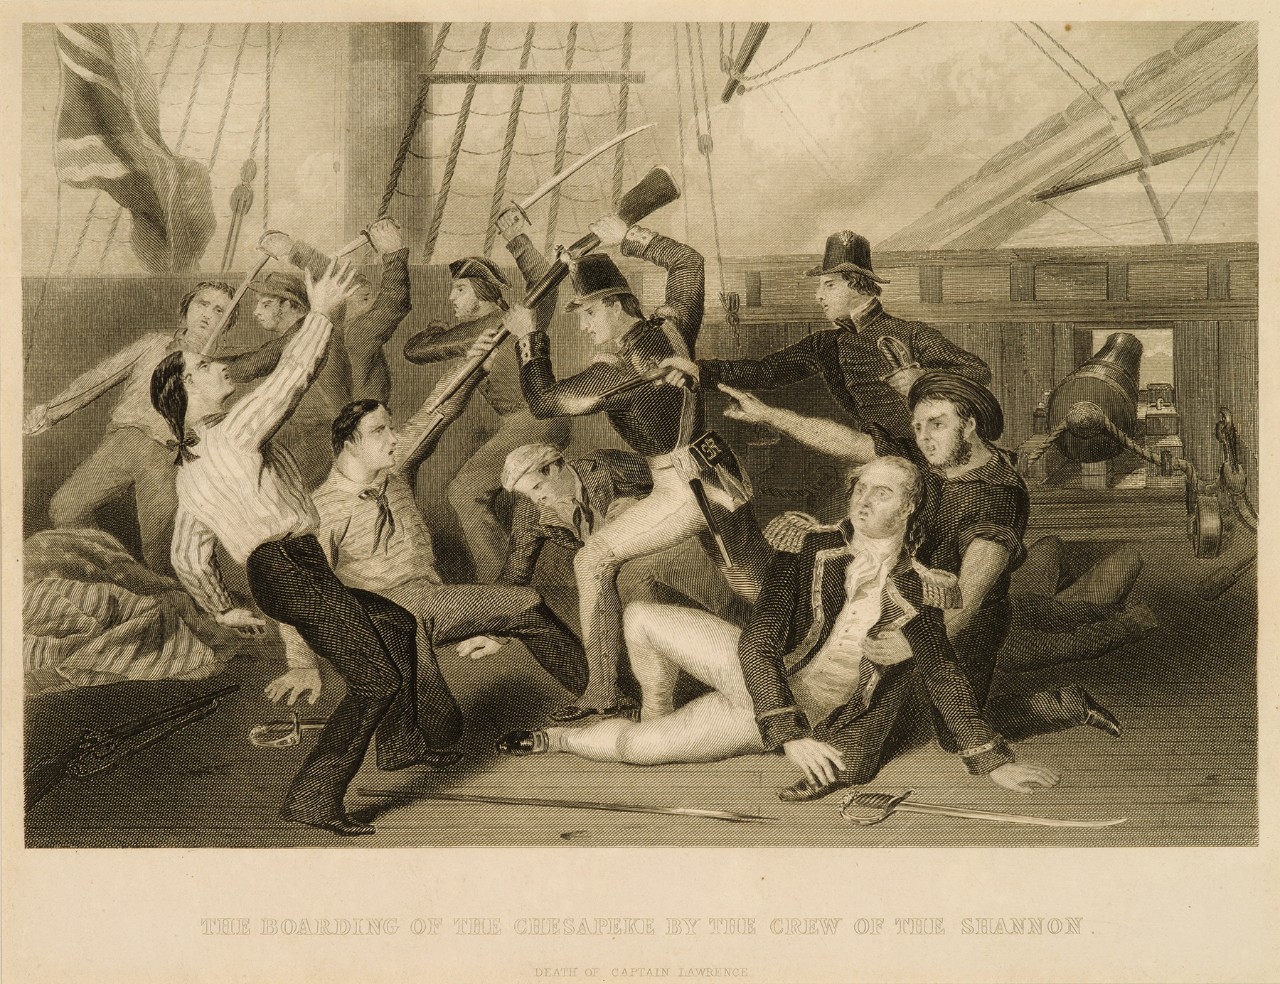 An officer laying on the deck being held by a sailor, behind them American sailors fighting British sailors